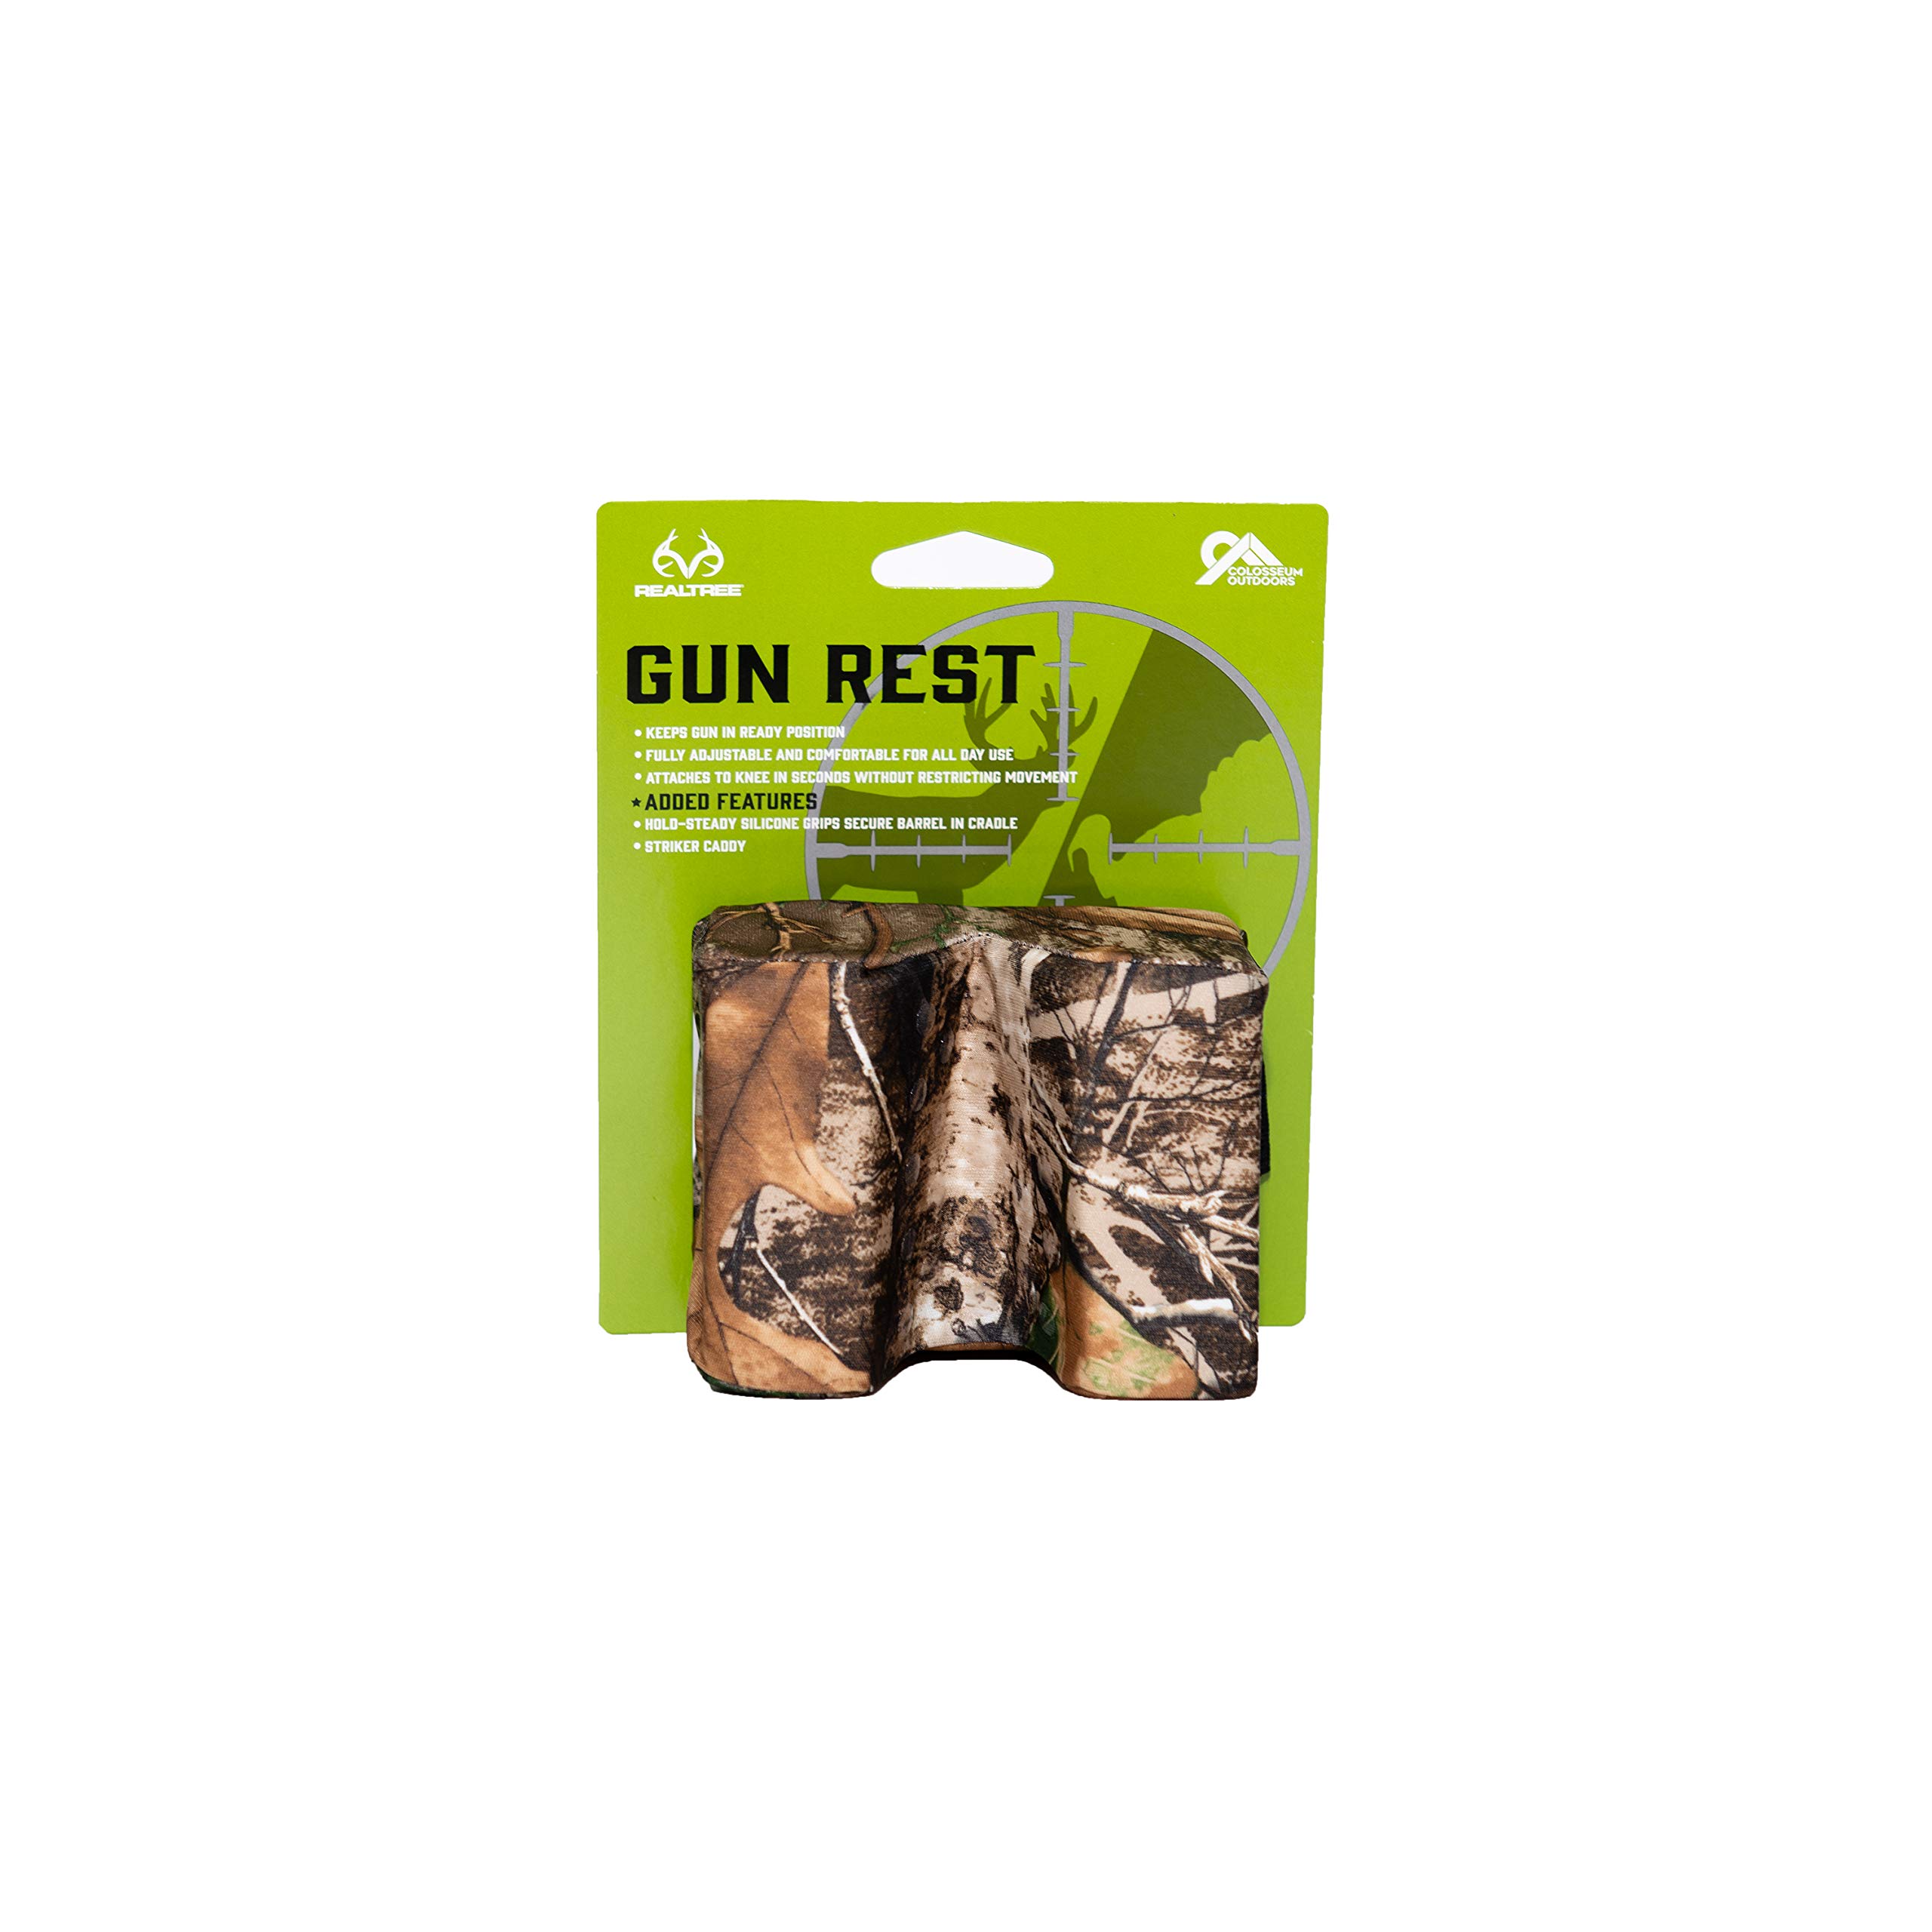 Realtree Camo Strut Shooting Gun Rest and Turkey Mouth Call Pouch Combo for Turkey Hunting